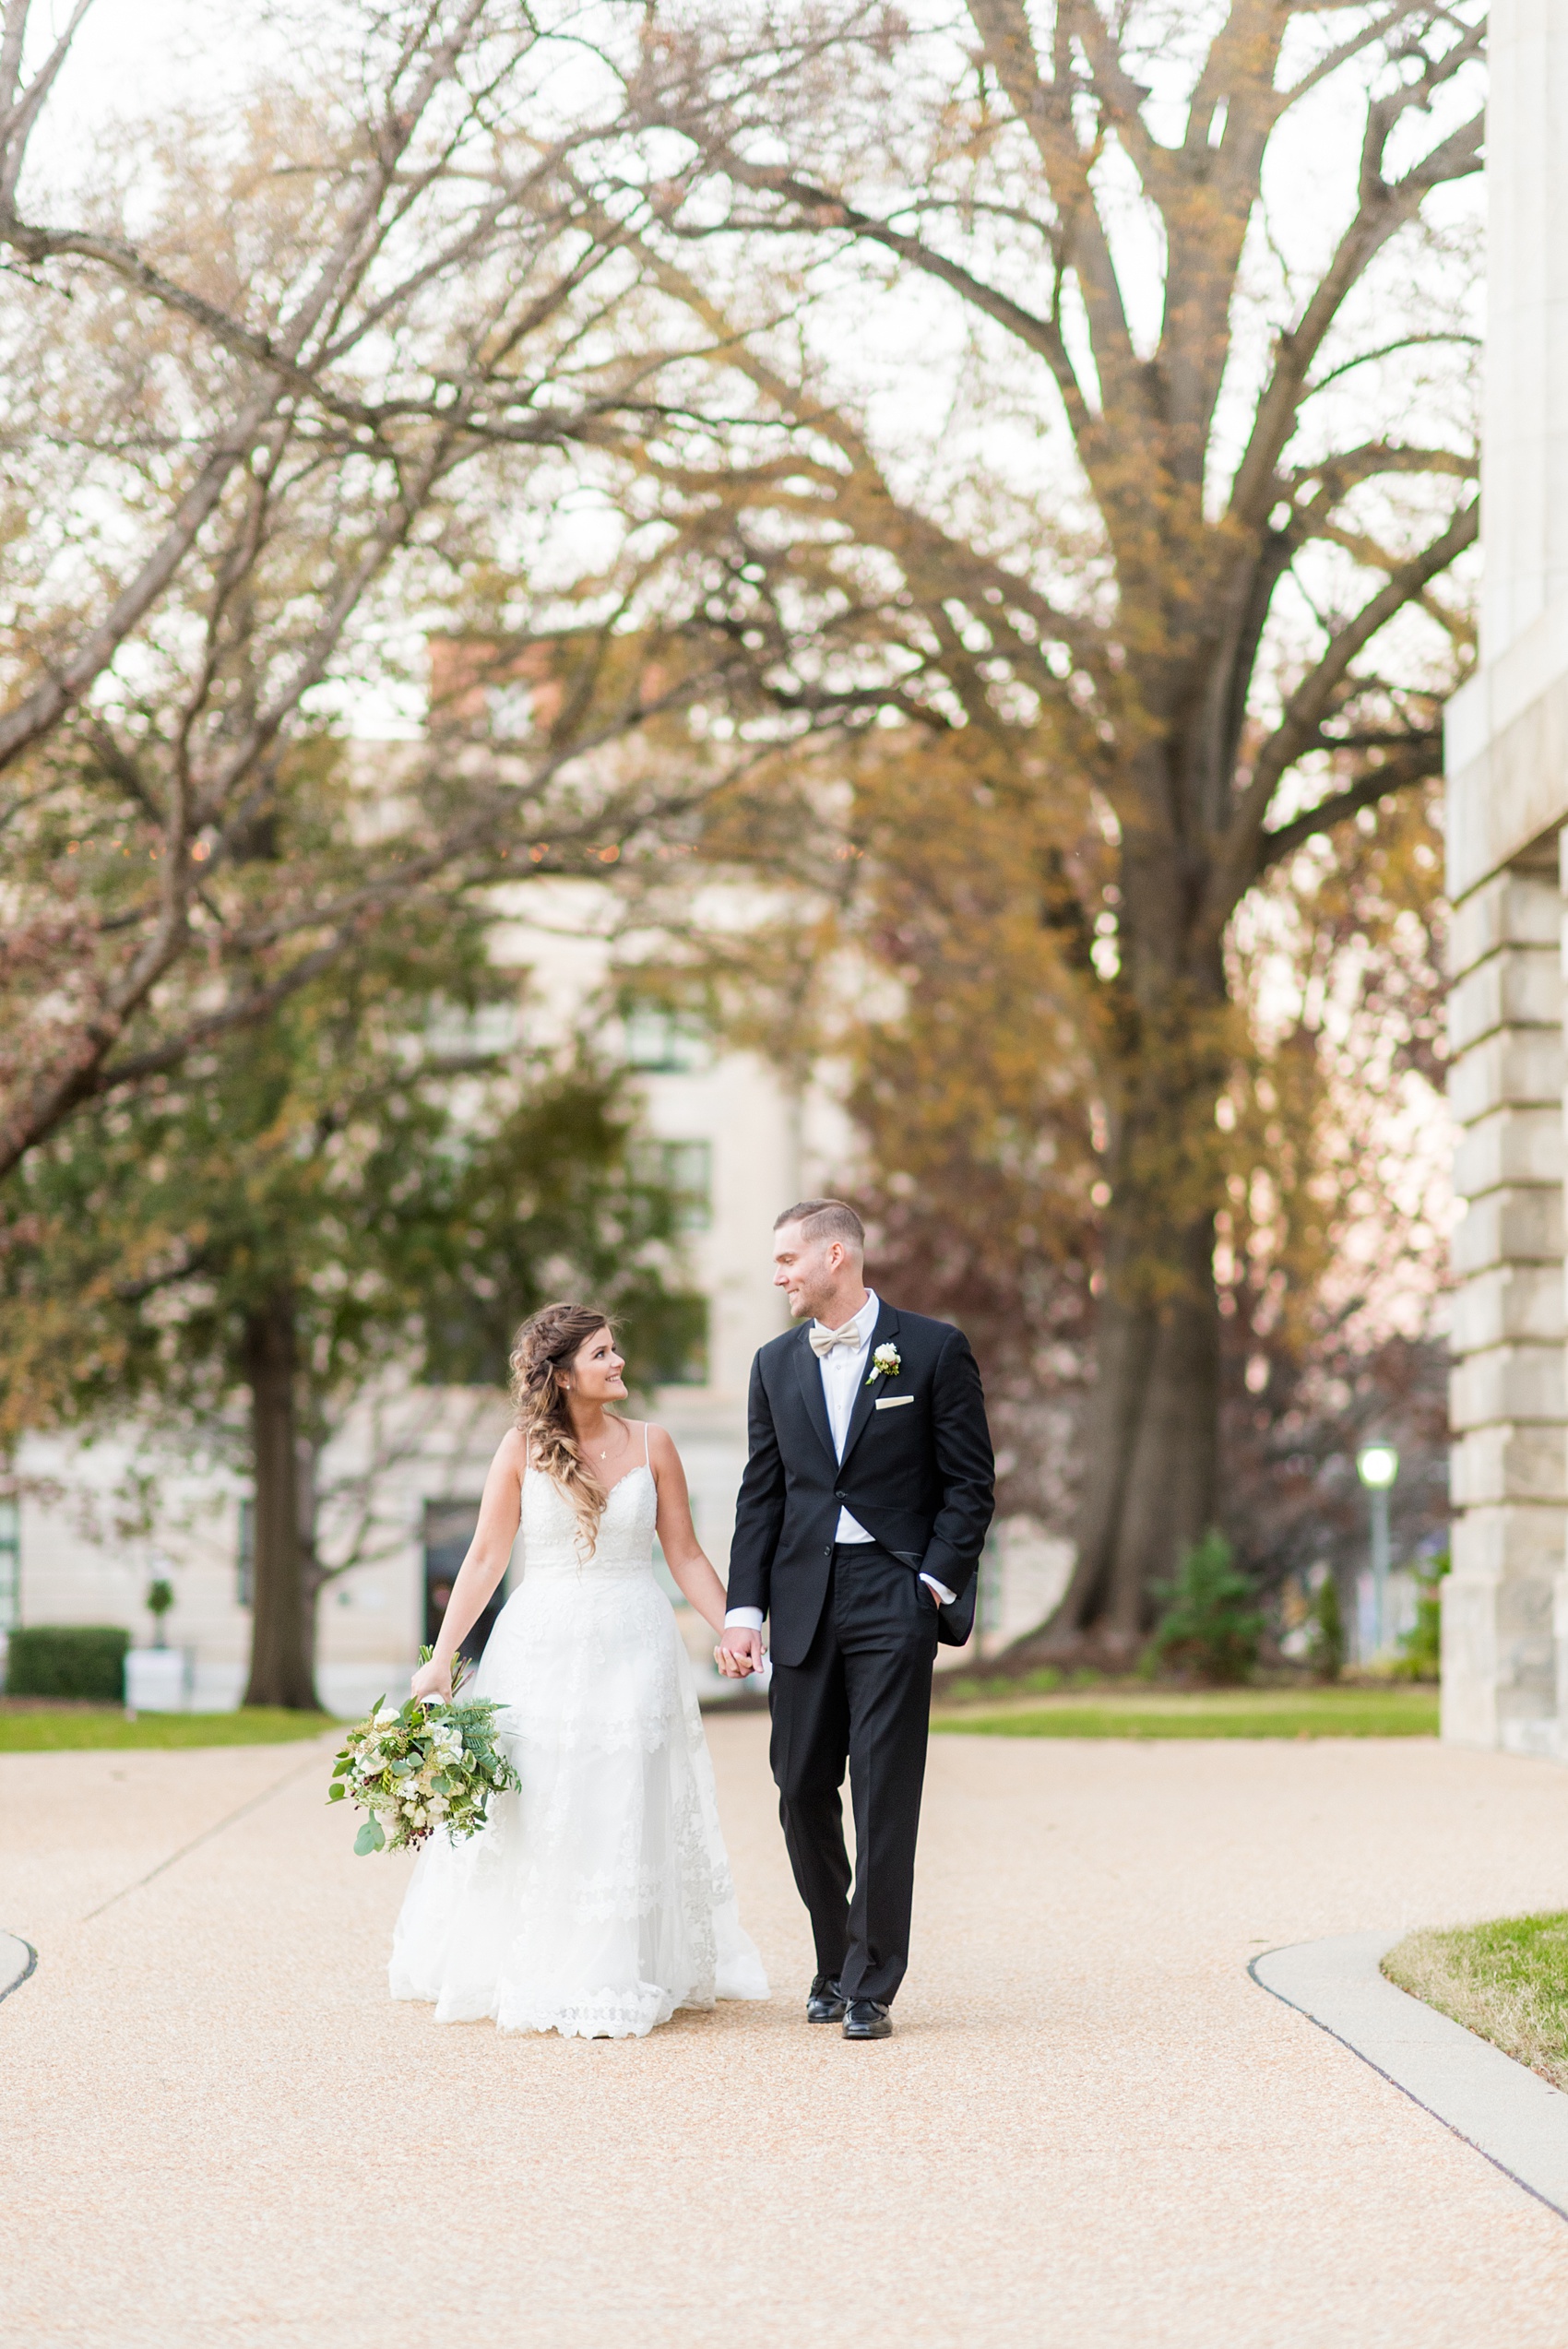 Pictures from a Christmas inspired wedding in downtown Raleigh, North Carolina by Mikkel Paige Photography. The bride and groom took outdoor portraits by their church. Click through for more ideas from their beautiful celebration, including details and decor photos in a green and gold decor palette for their reception. #mikkelpaige #raleighweddingphotographer #downtownRaleigh #christmaswedding #greenandgoldwedding #brideandgroom #bridal